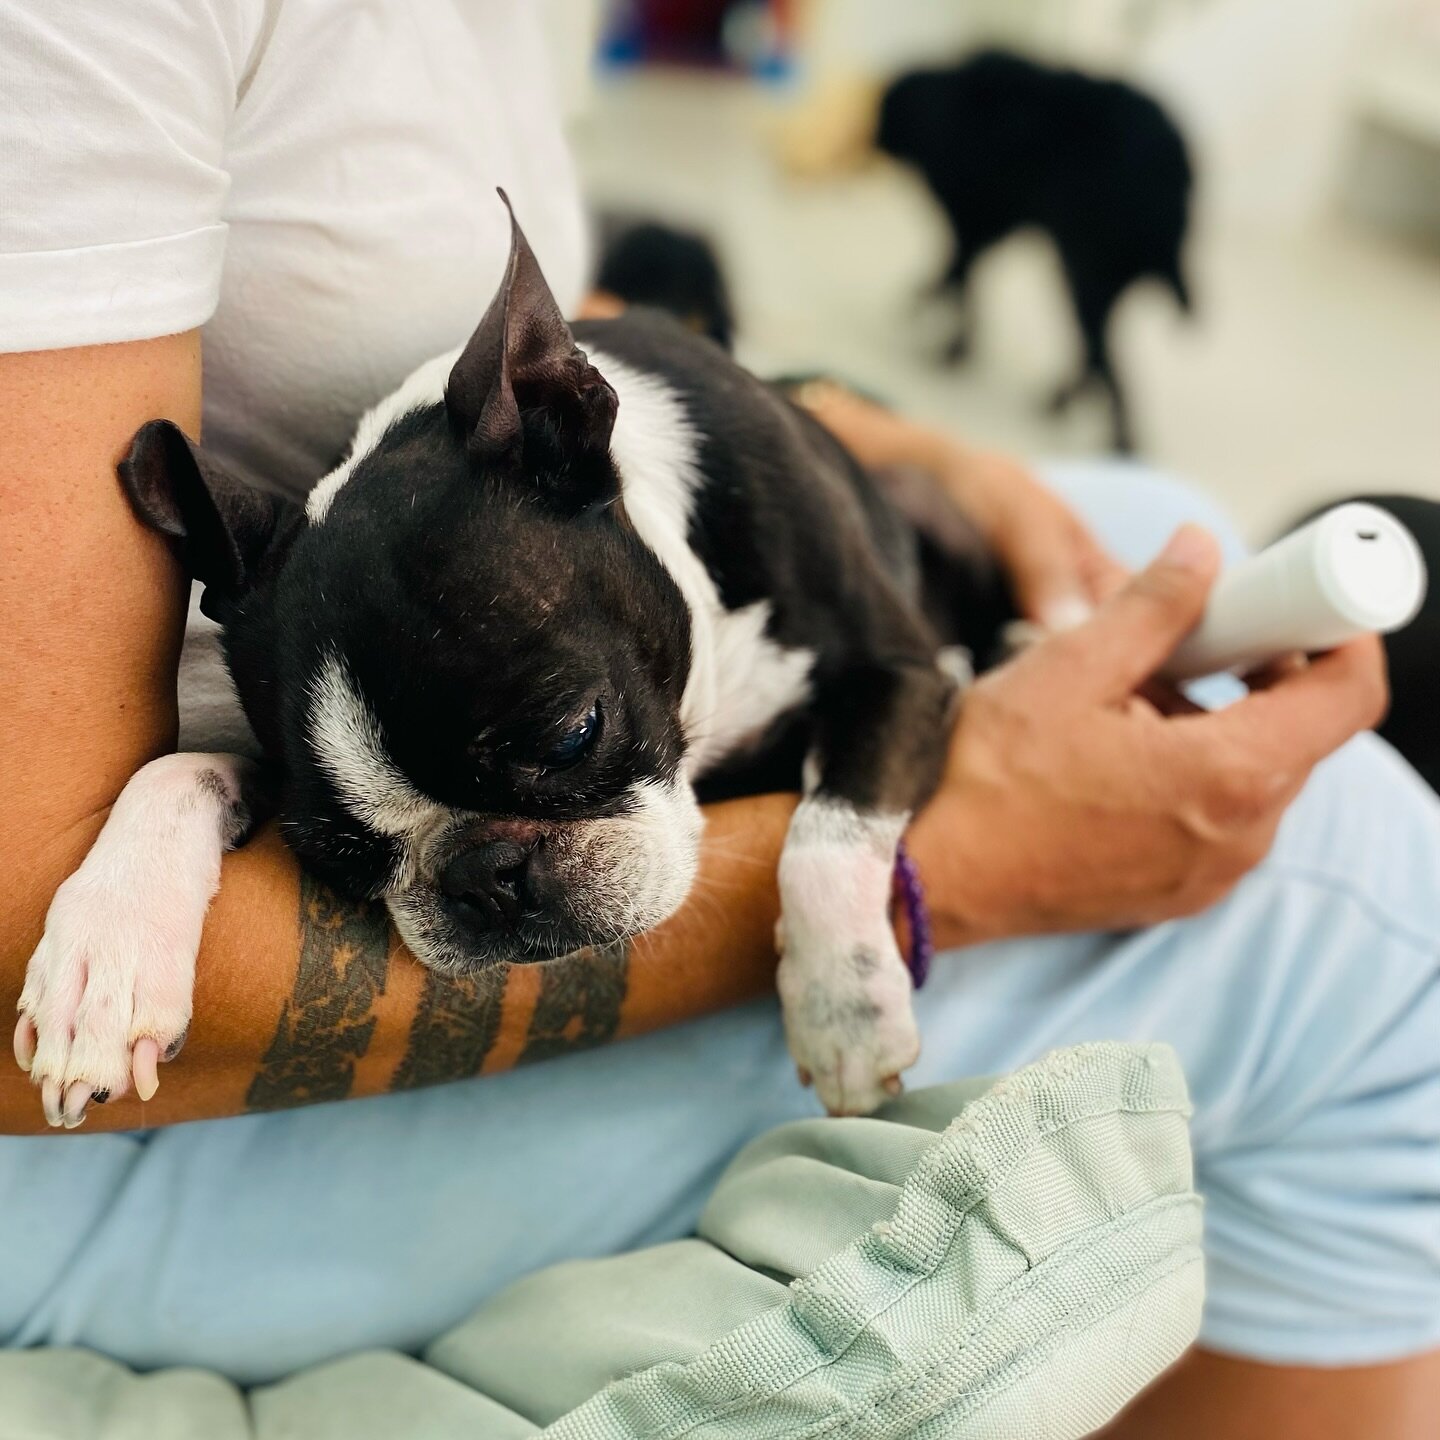 The Spa(w) is open! 🐾 

Gus enjoying a quick pedicure post his splash and dash (quick wash and blow dry) 🪮

If your furry friend needs a little quick spruce up, we&rsquo;re always happy to help! 🐶 

#gorgeouspets